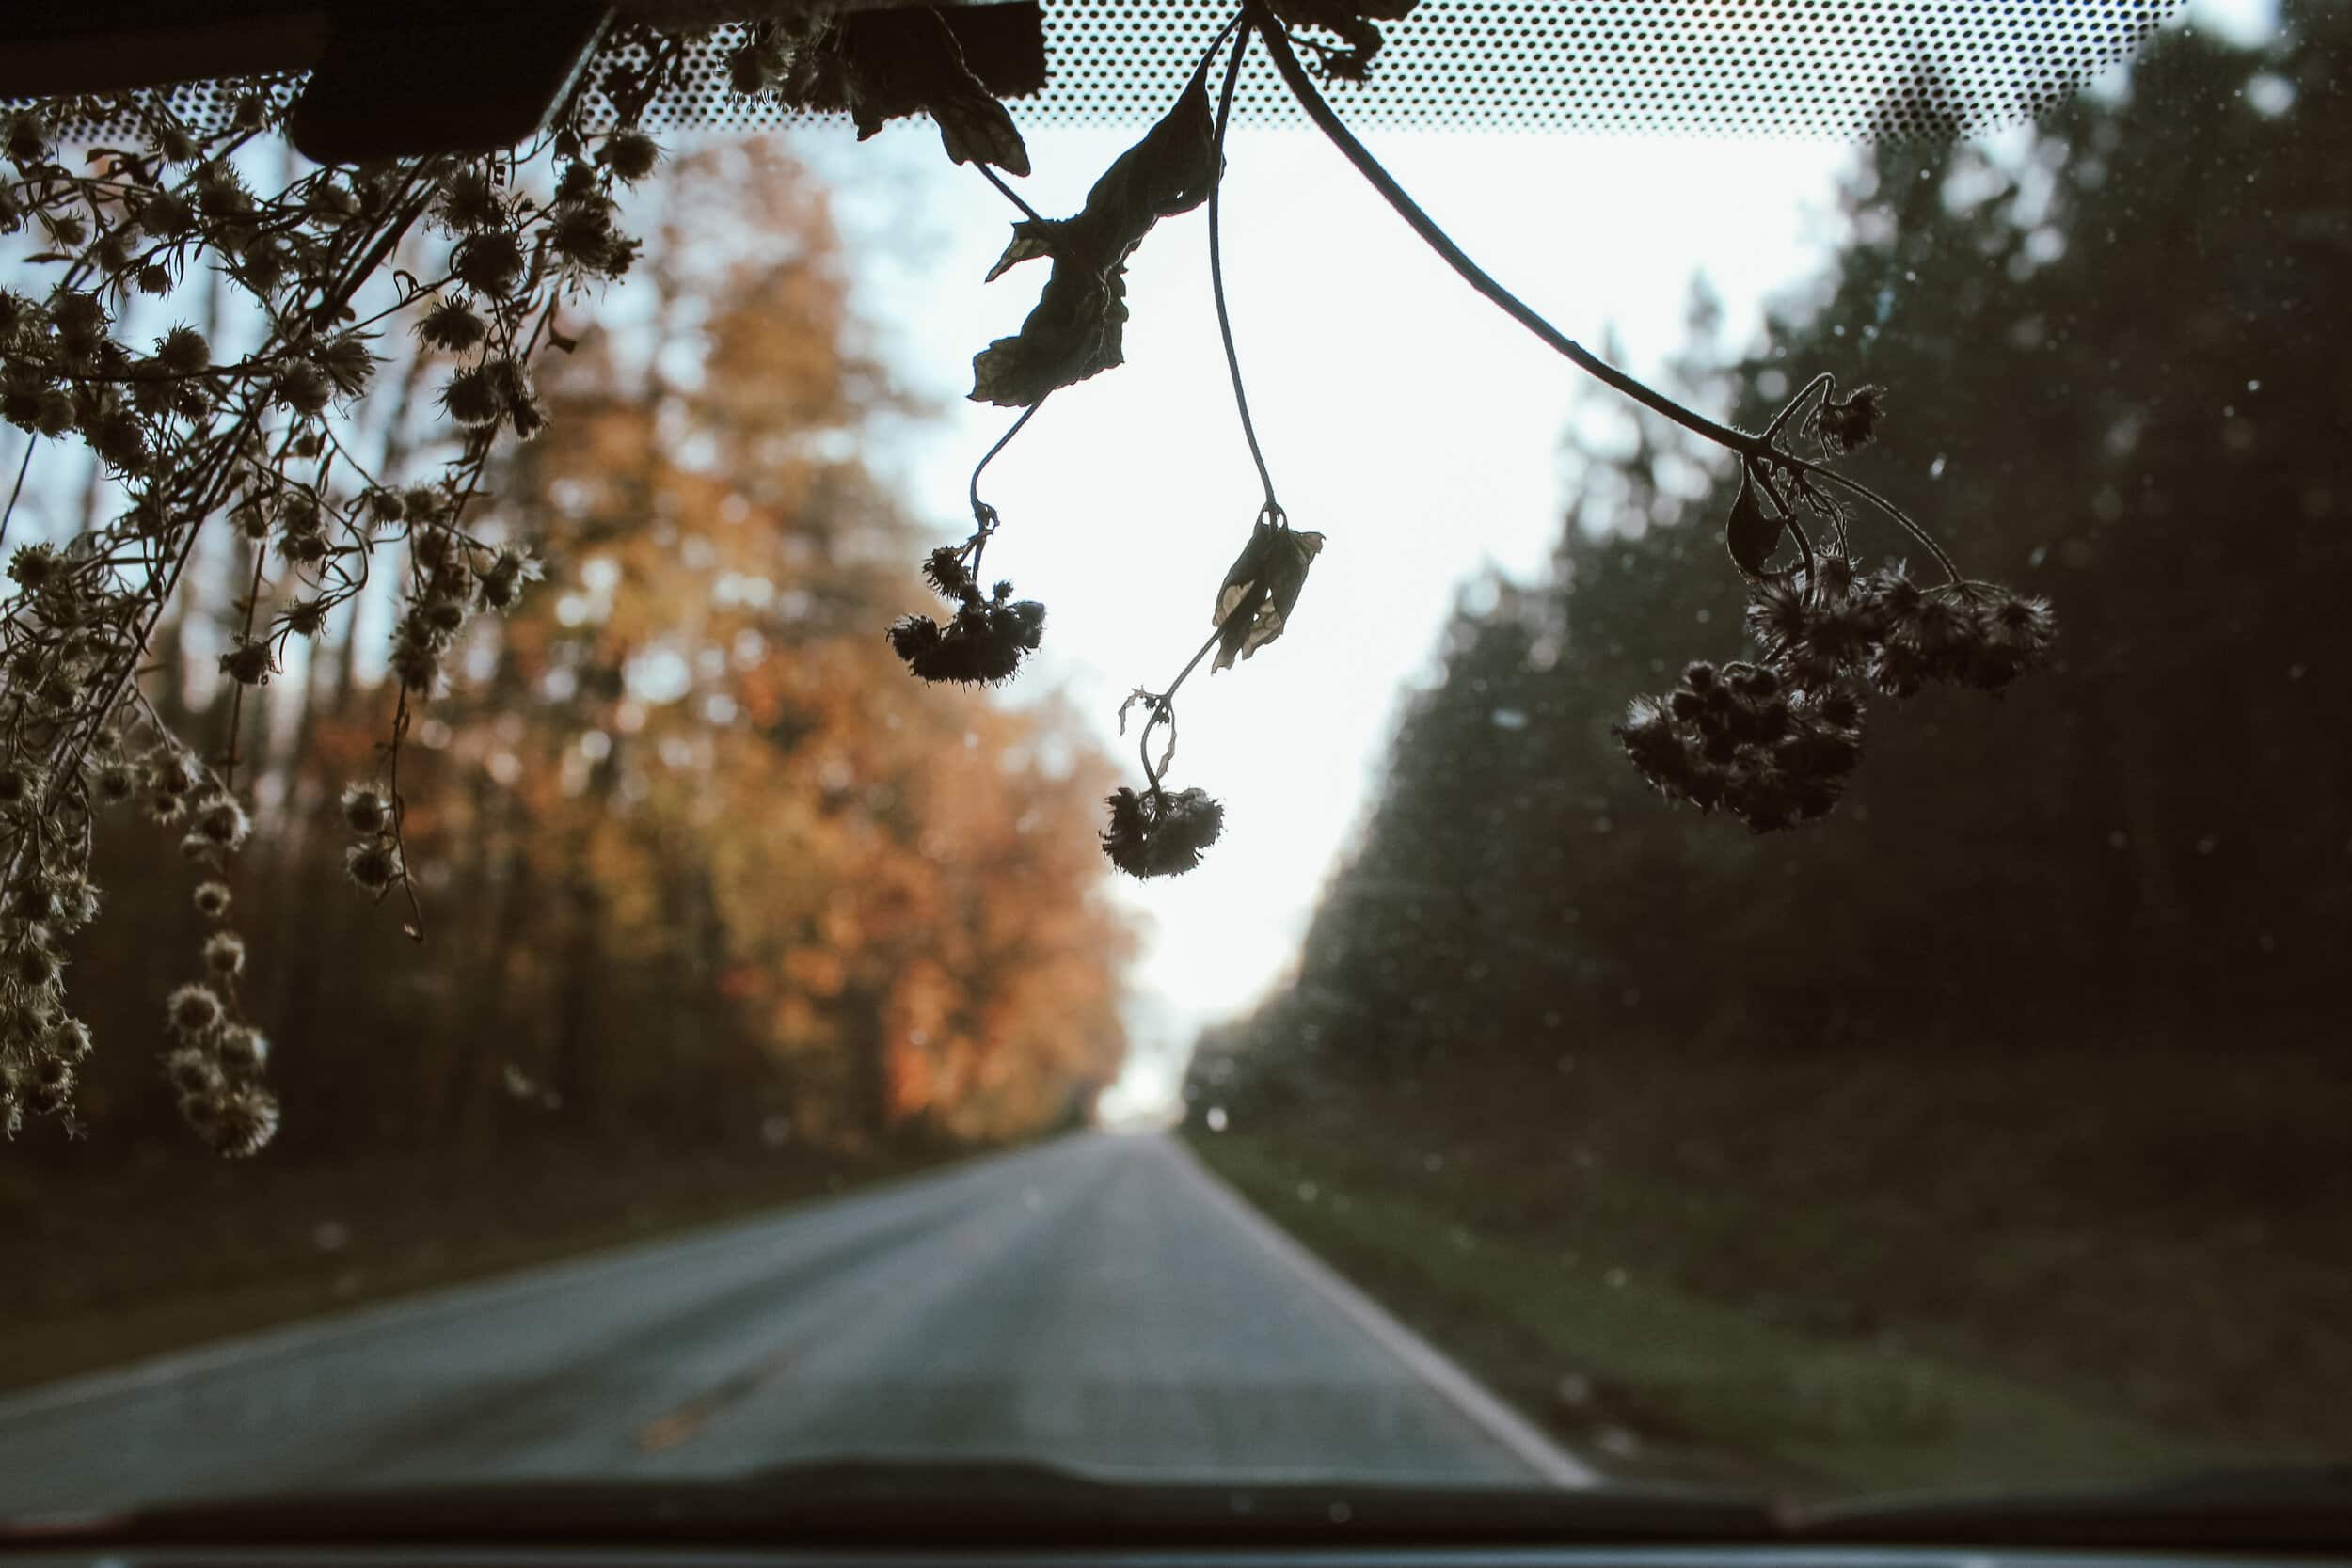 Many students drove back home for the first time since fall break. The view on the road was a pretty sight, with fall leaves at their brightest color of the season.